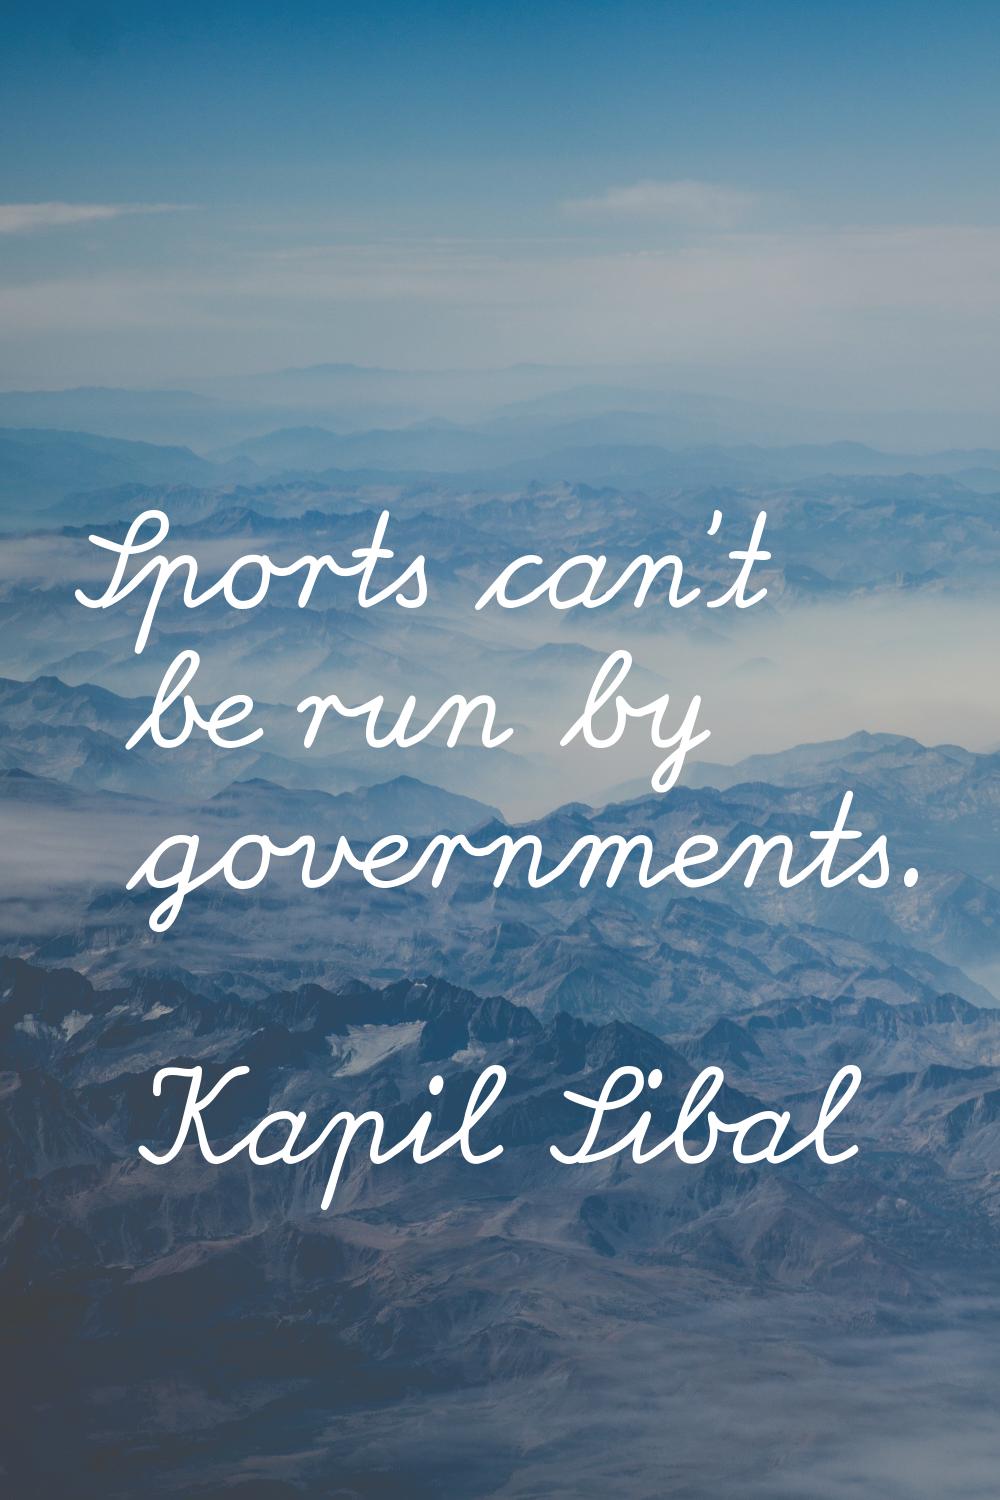 Sports can't be run by governments.